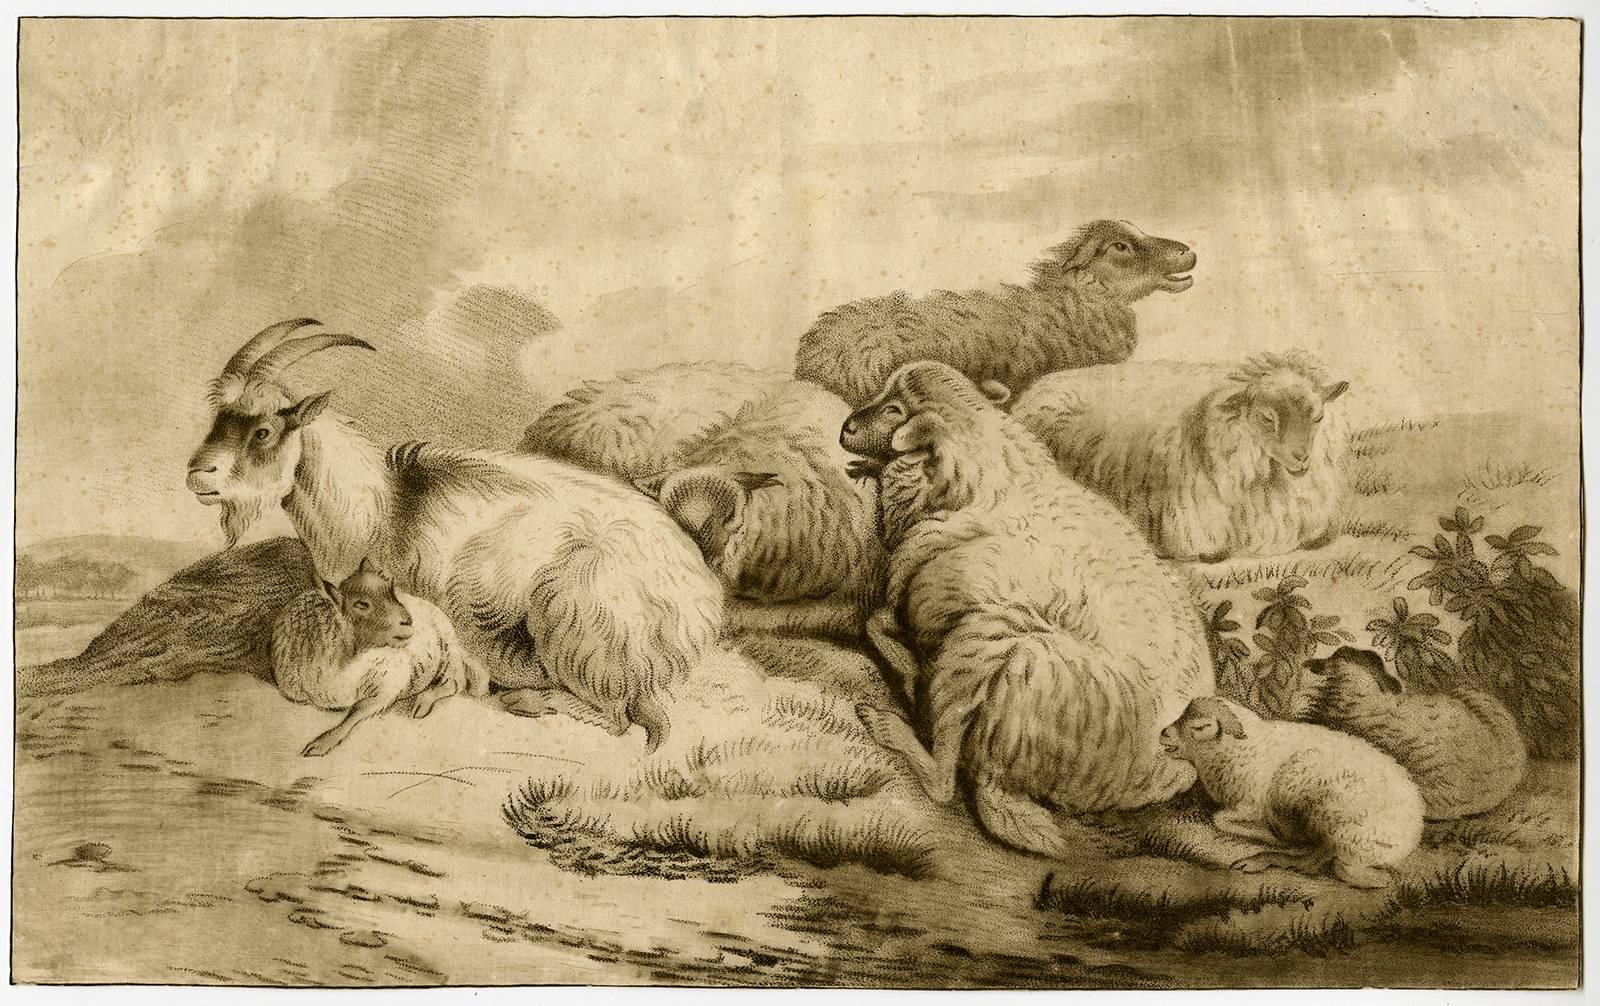 William Baillie Animal Print - Untitled - Goat and sheep in a landscape.